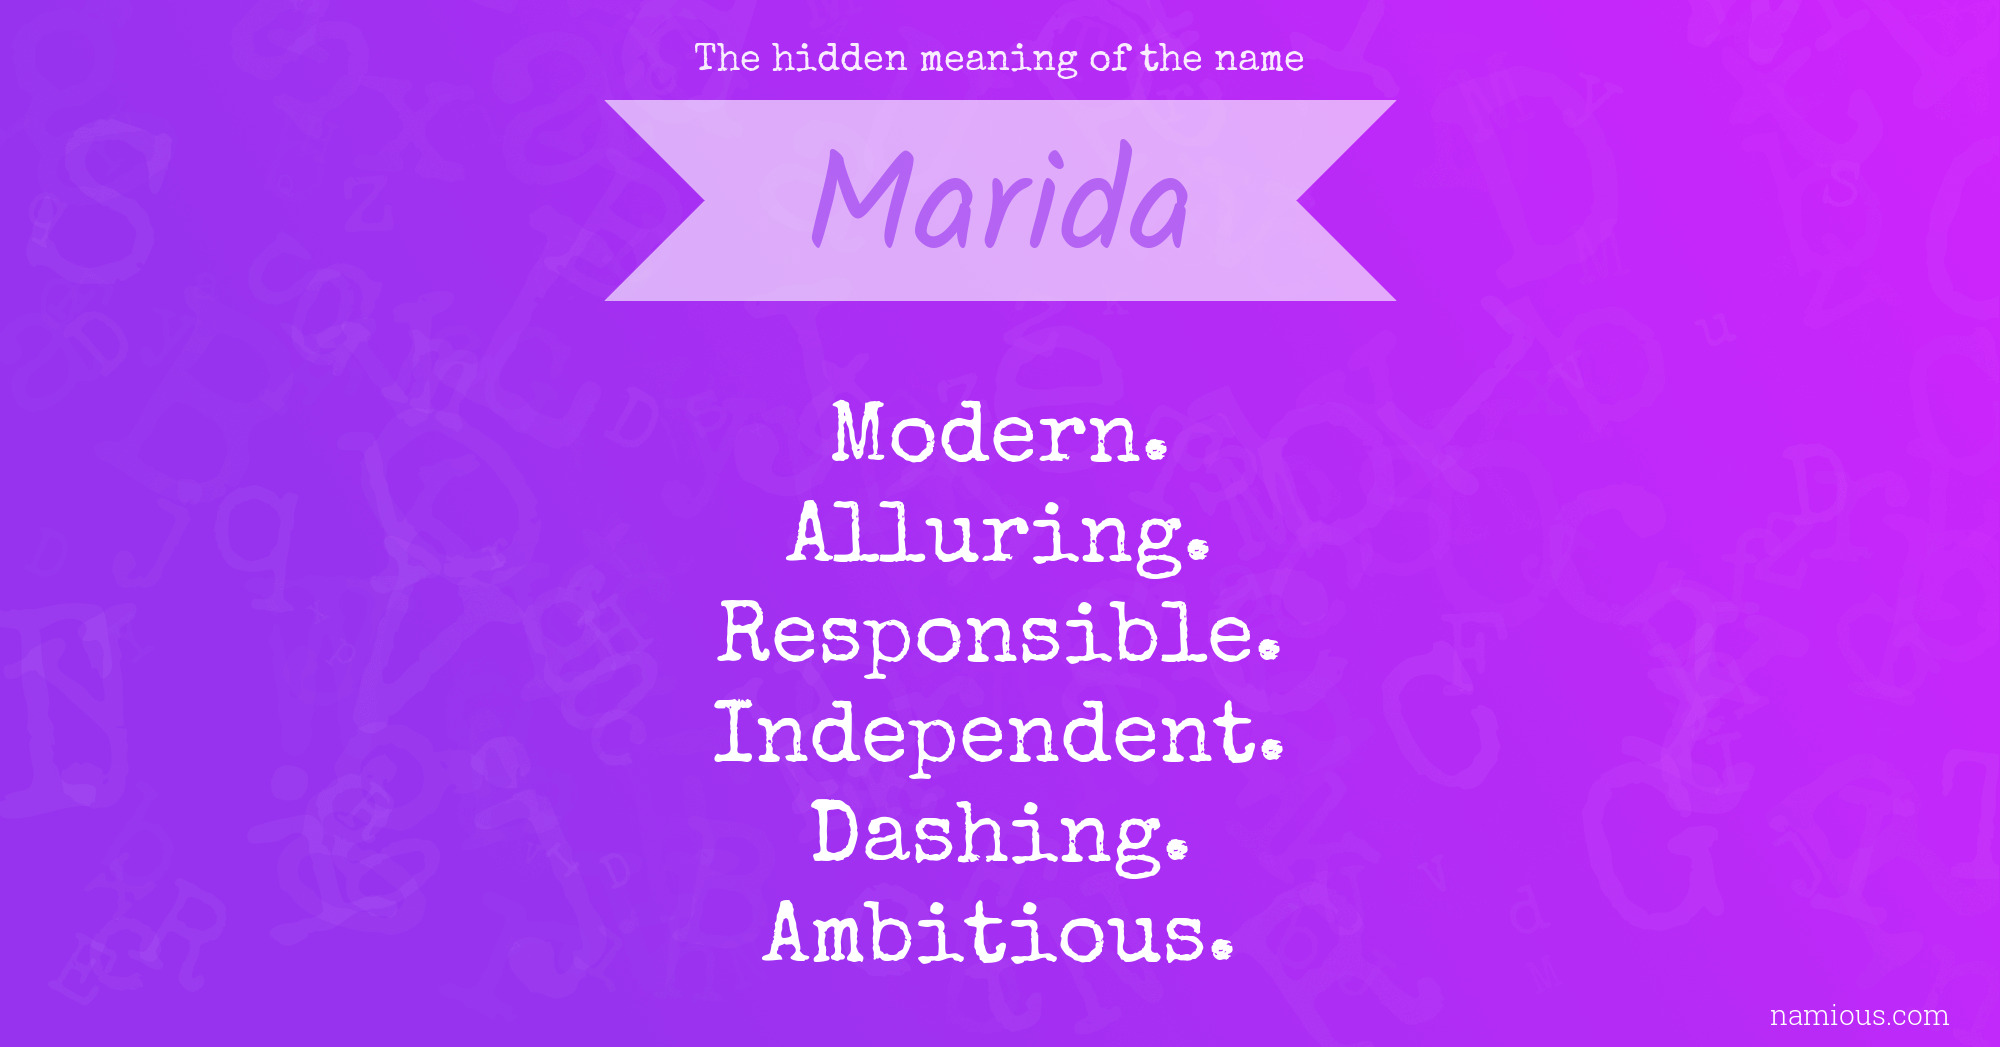 The hidden meaning of the name Marida